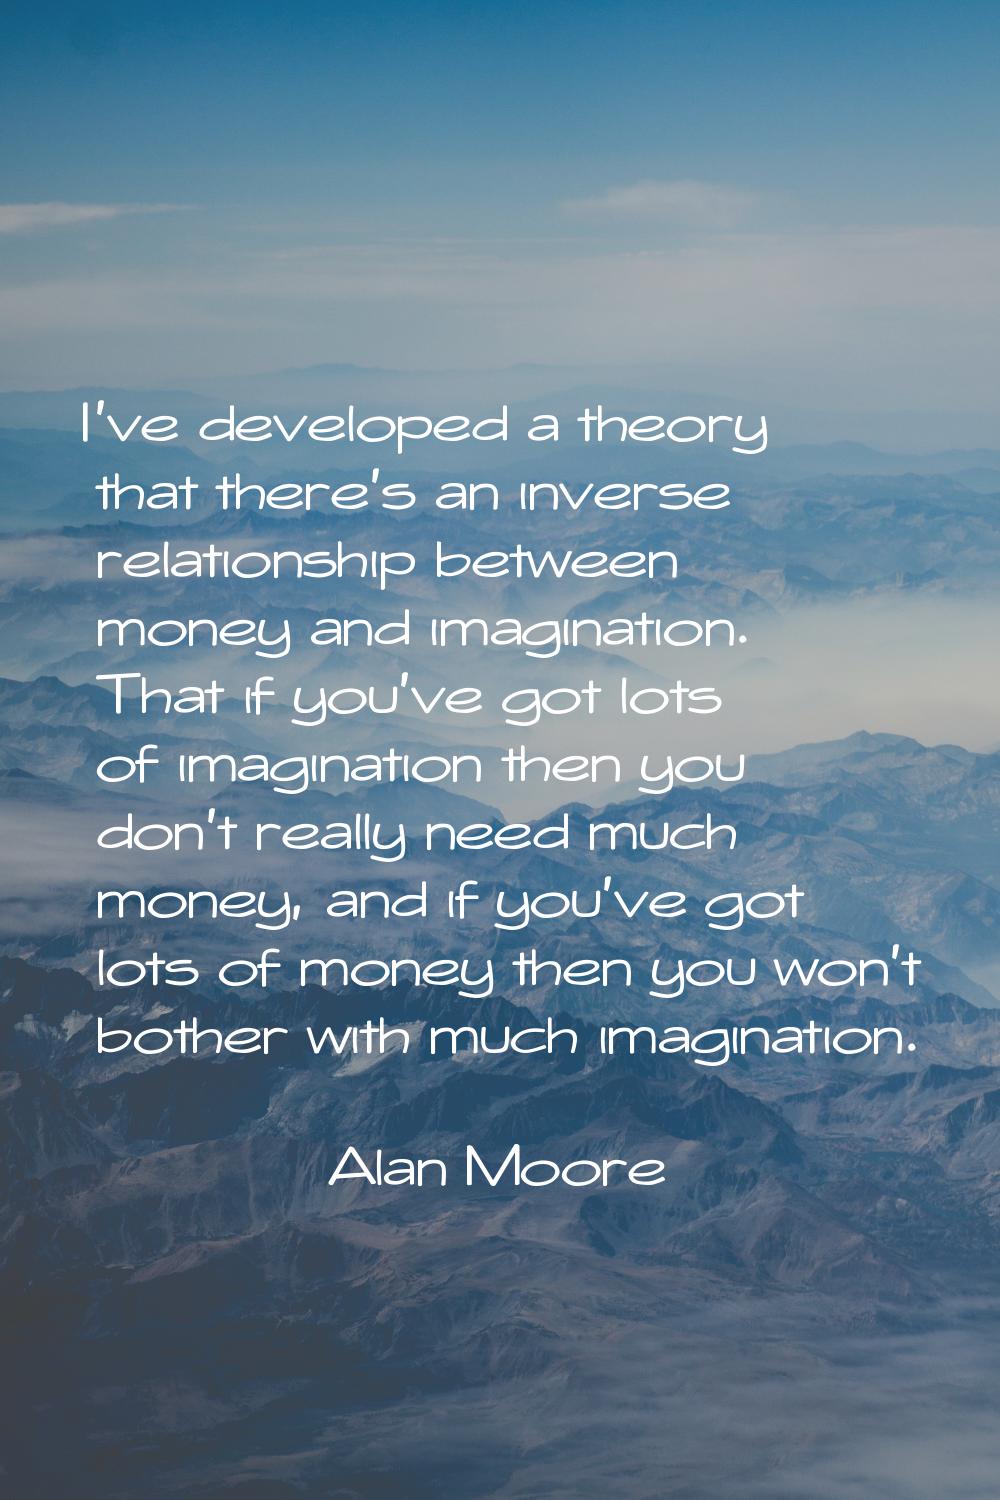 I've developed a theory that there's an inverse relationship between money and imagination. That if